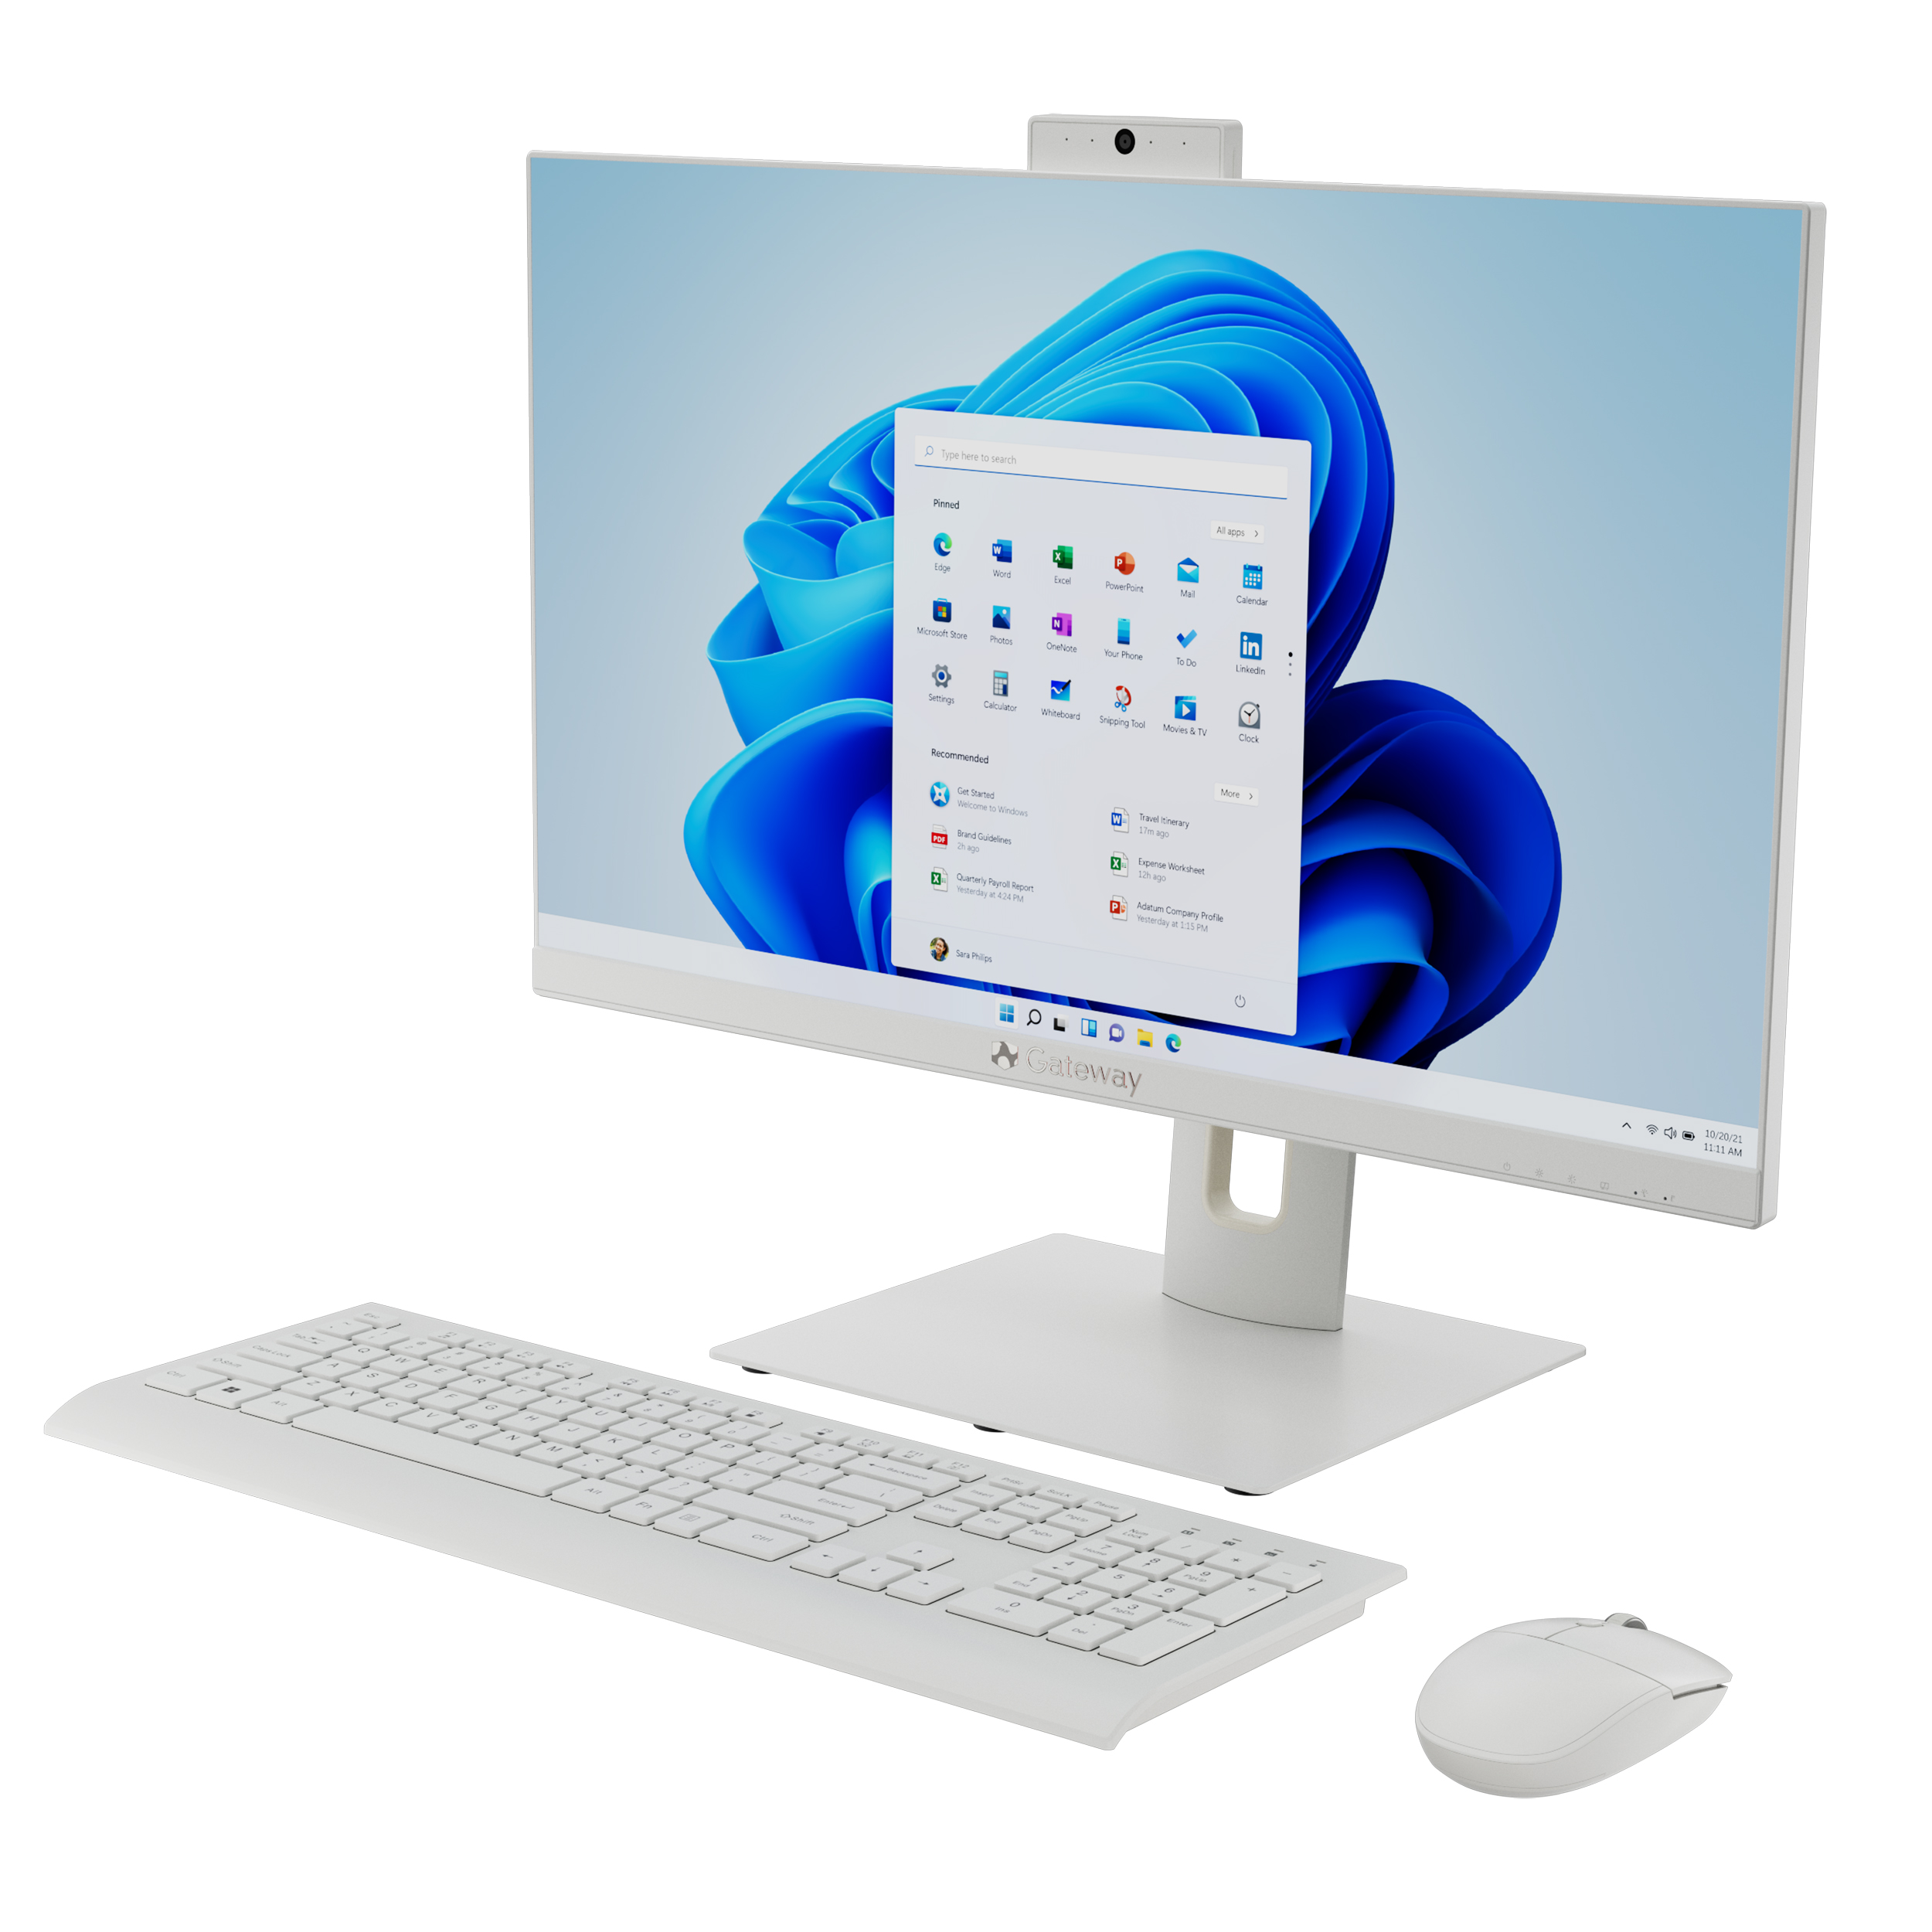 Gateway 23.8" All-in-one Desktop, Fully Adjustable Stand, FHD, Intel Pentium J5040, 4GB RAM, 128GB SSD, 2MP Camera, Windows 11, Microsoft 365 Personal 1-Year Included, Mouse & Keyboard Included, White - image 4 of 11